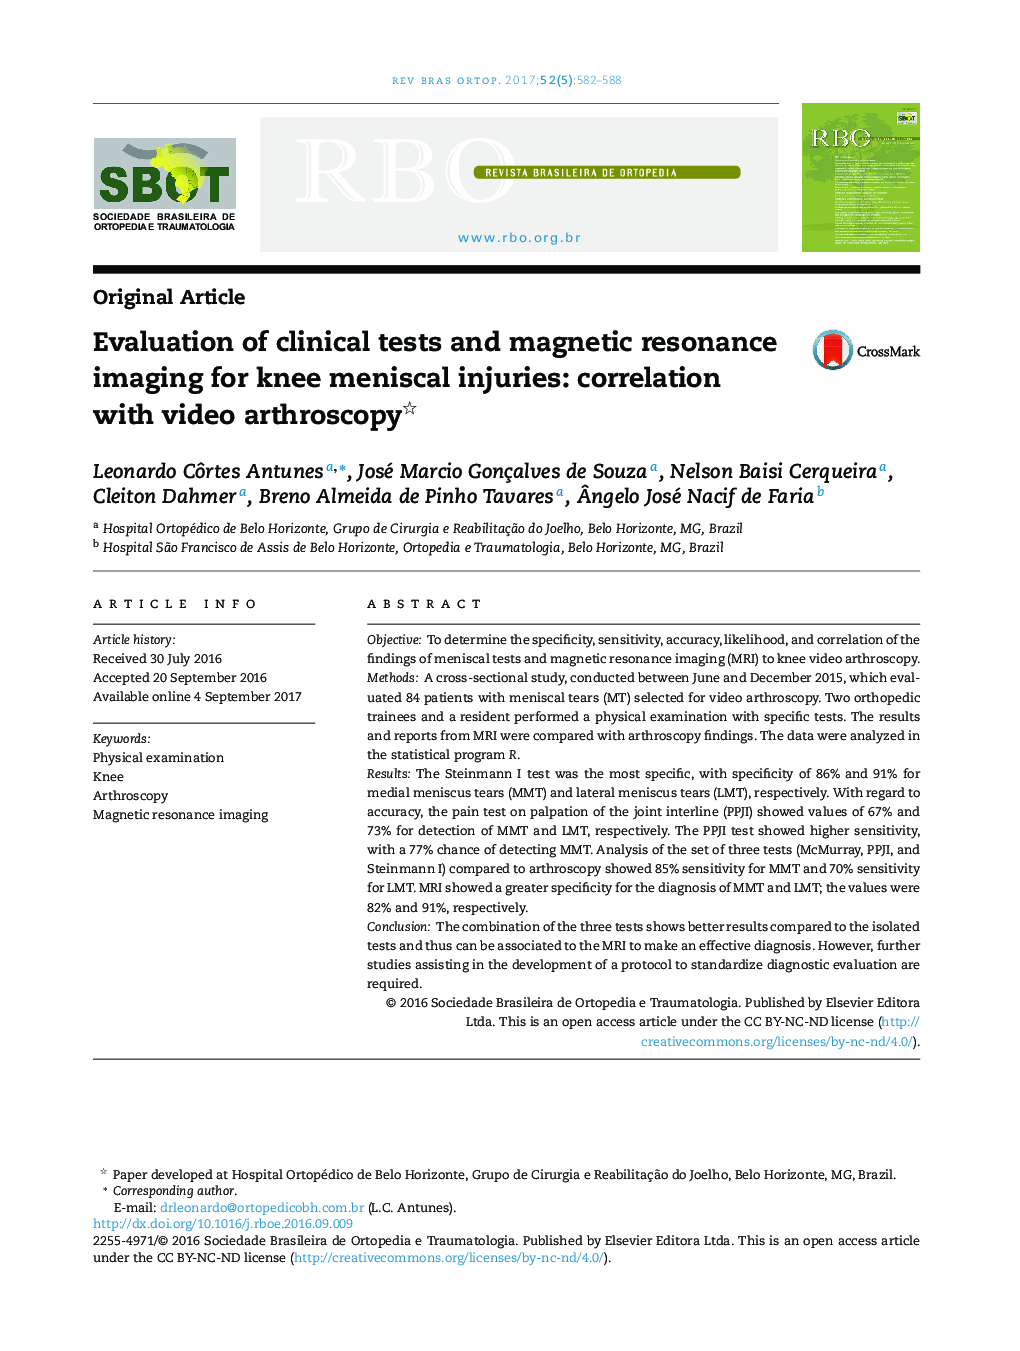 Evaluation of clinical tests and magnetic resonance imaging for knee meniscal injuries: correlation with video arthroscopy